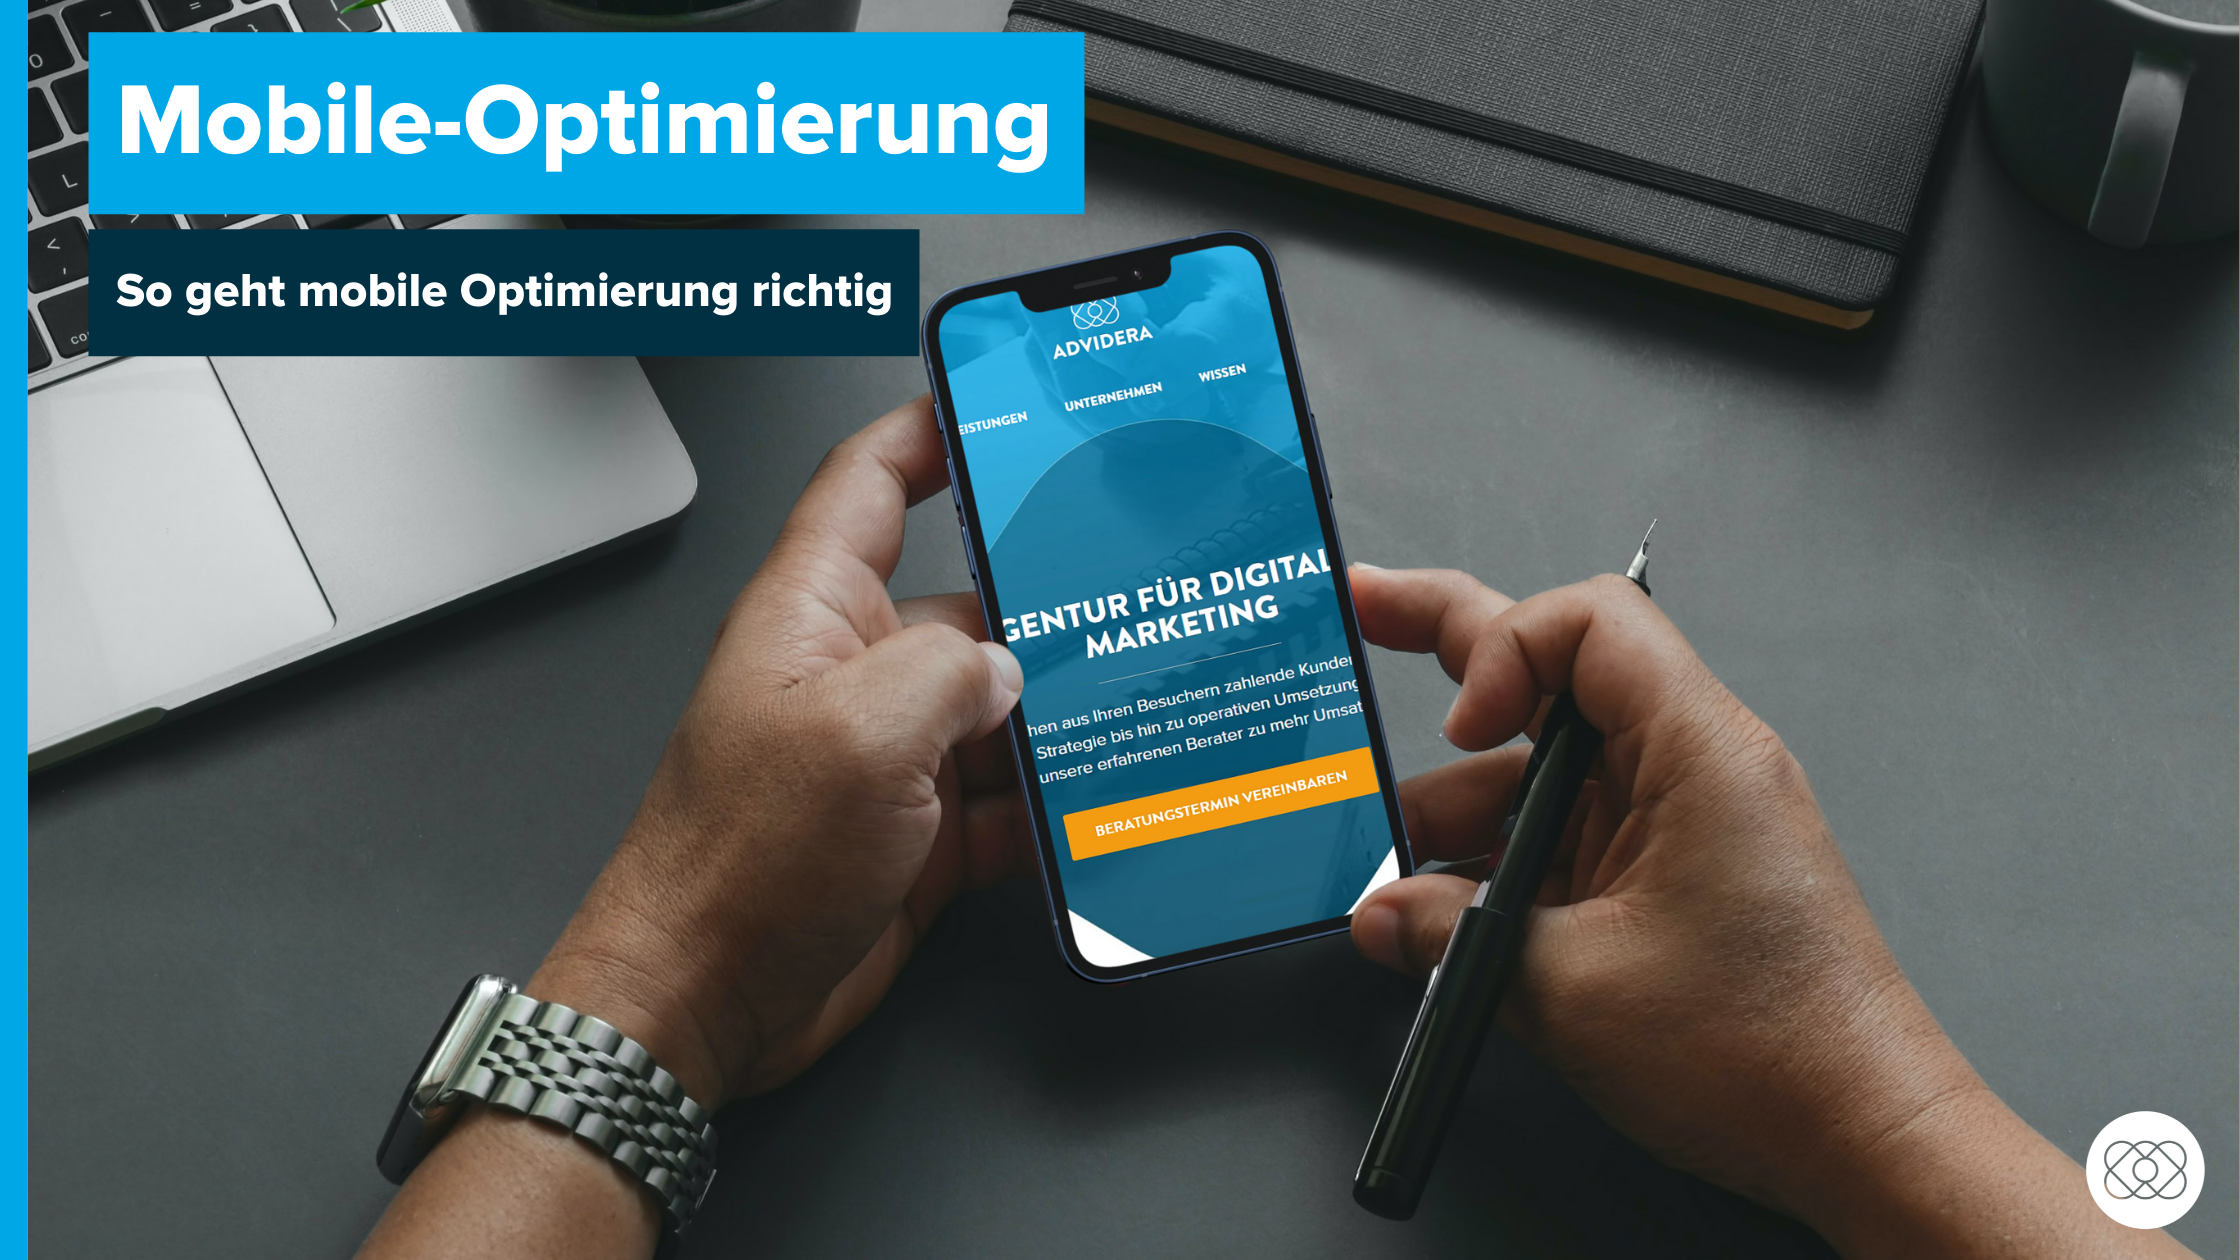 Mobile-Optimierung